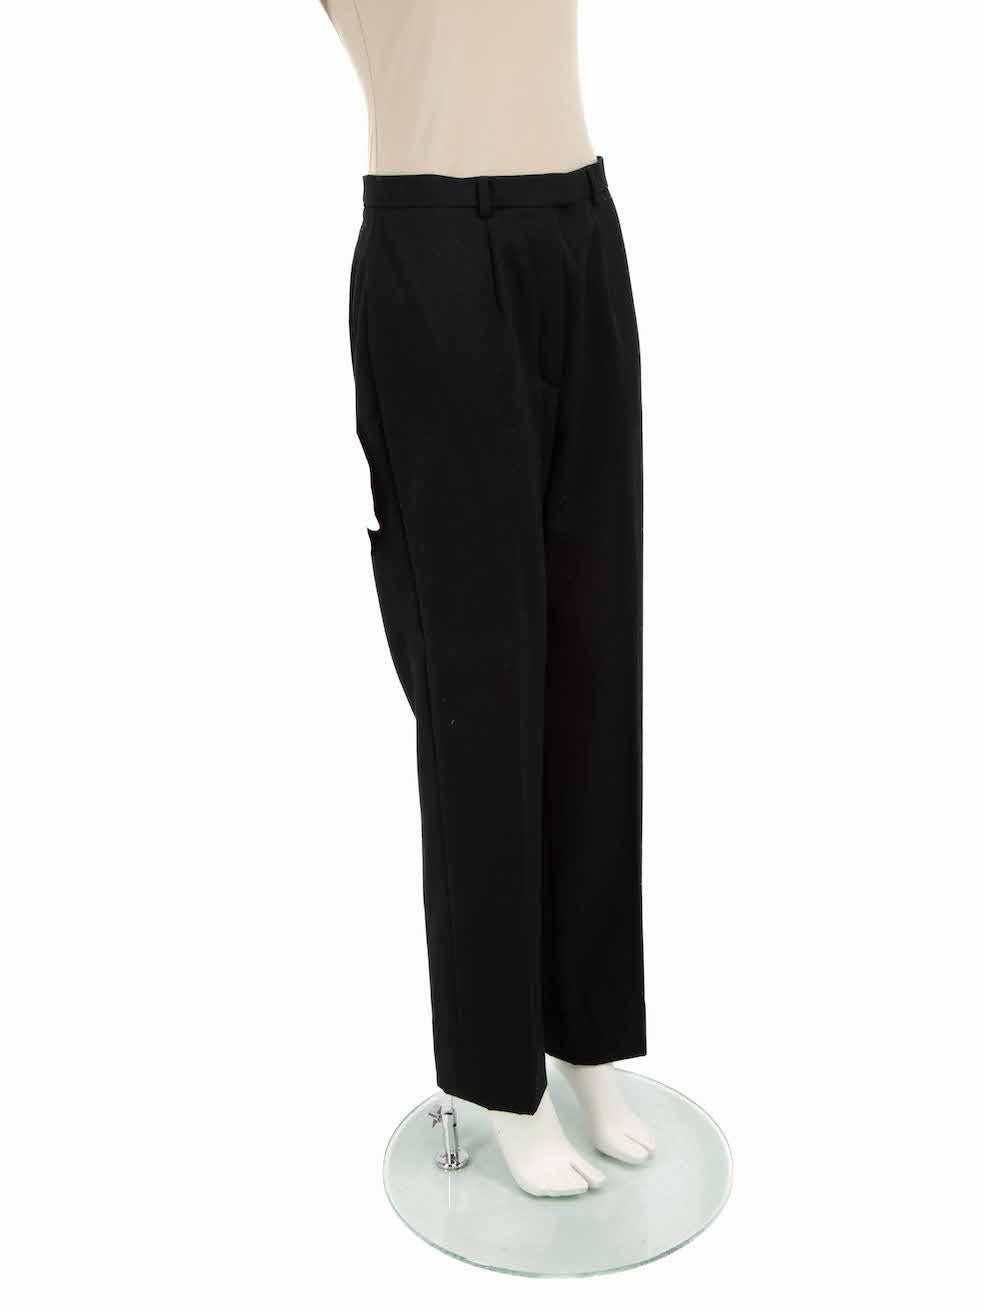 CONDITION is Very good. Hardly any visible wear to trousers is evident on this used Escada designer resale item.
 
 
 
 Details
 
 
 Black
 
 Wool
 
 Trousers
 
 Straight leg
 
 High rise
 
 Fly zip, hook and button fastening
 
 
 
 
 
 Made in